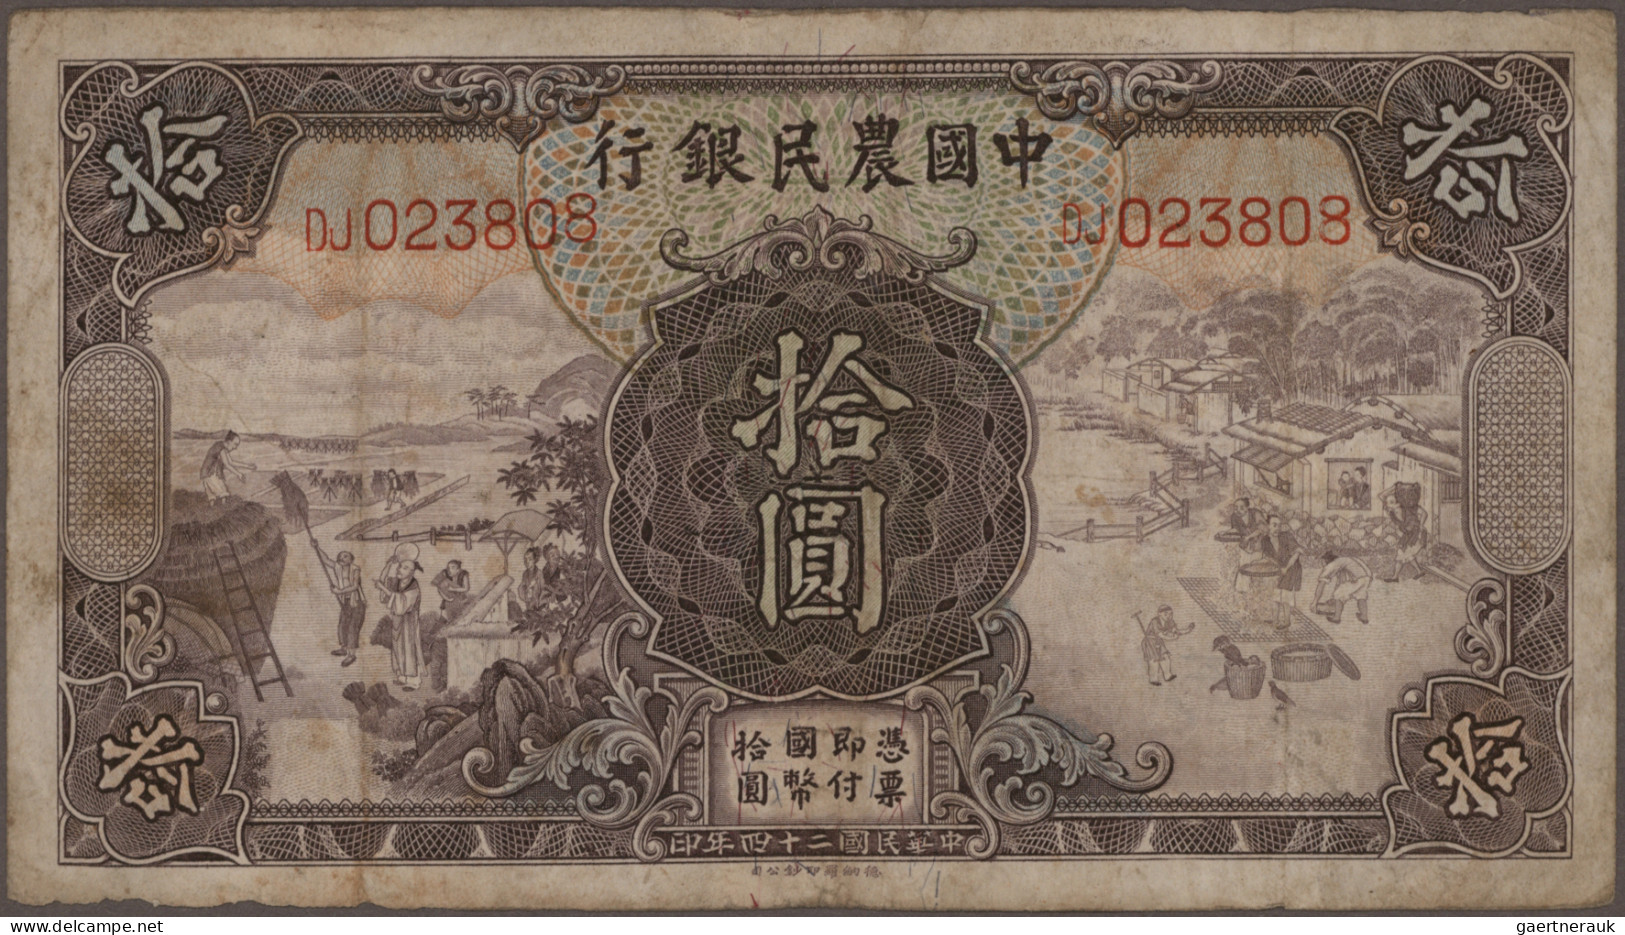 China: Huge lot with more than 80 banknotes, comprising for example CENTRAL BANK